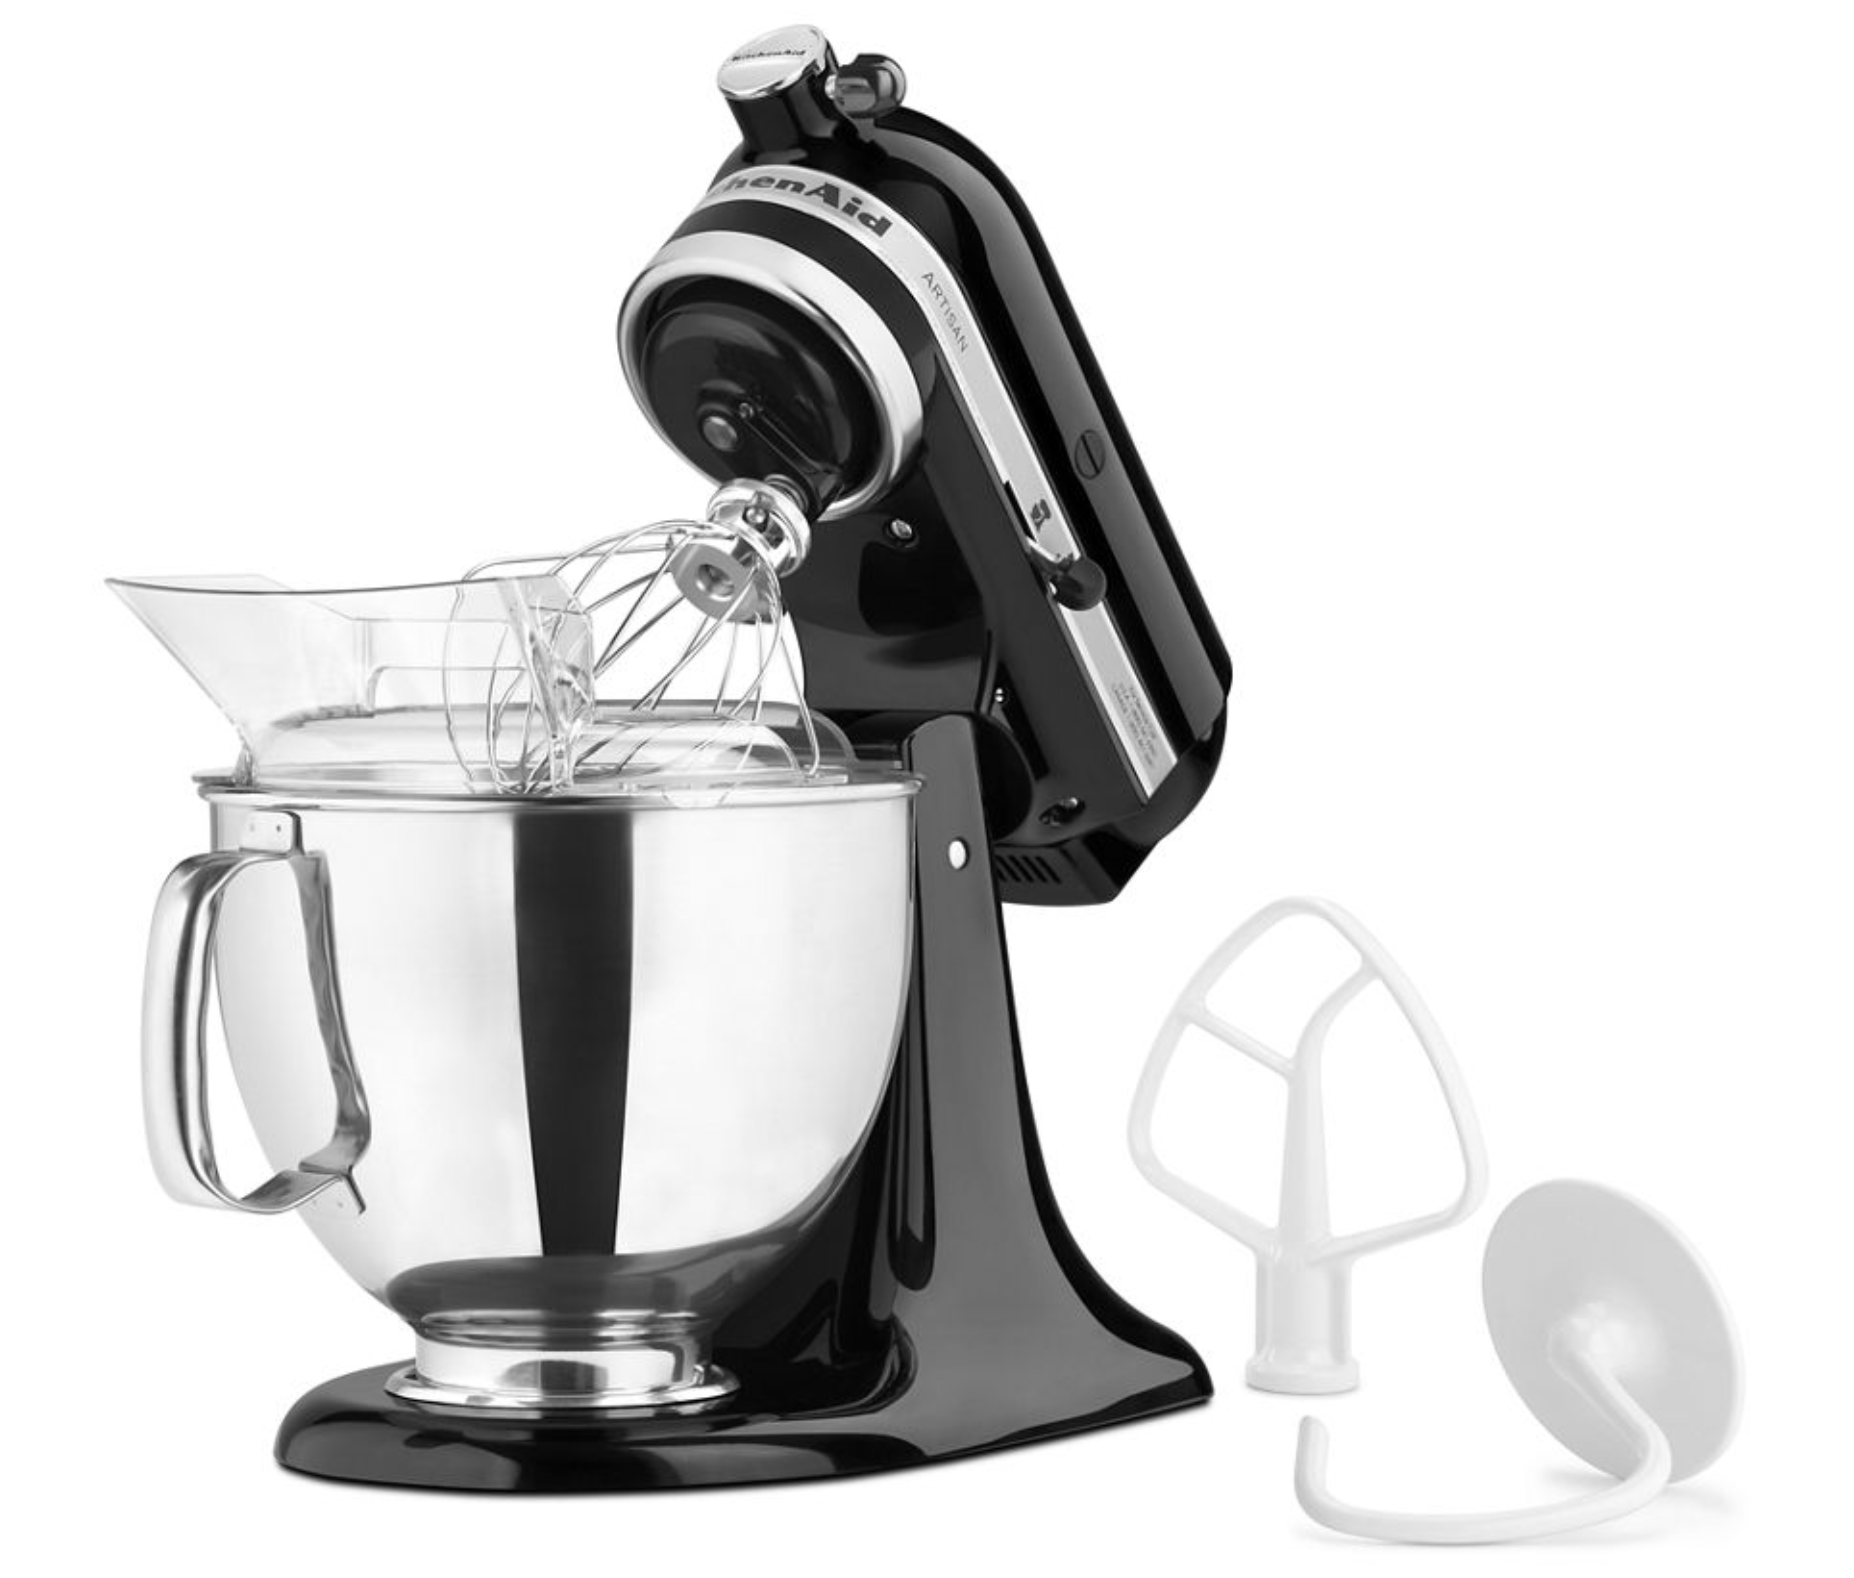 The KitchenAid mixer on a blank background surrounded by its attachments